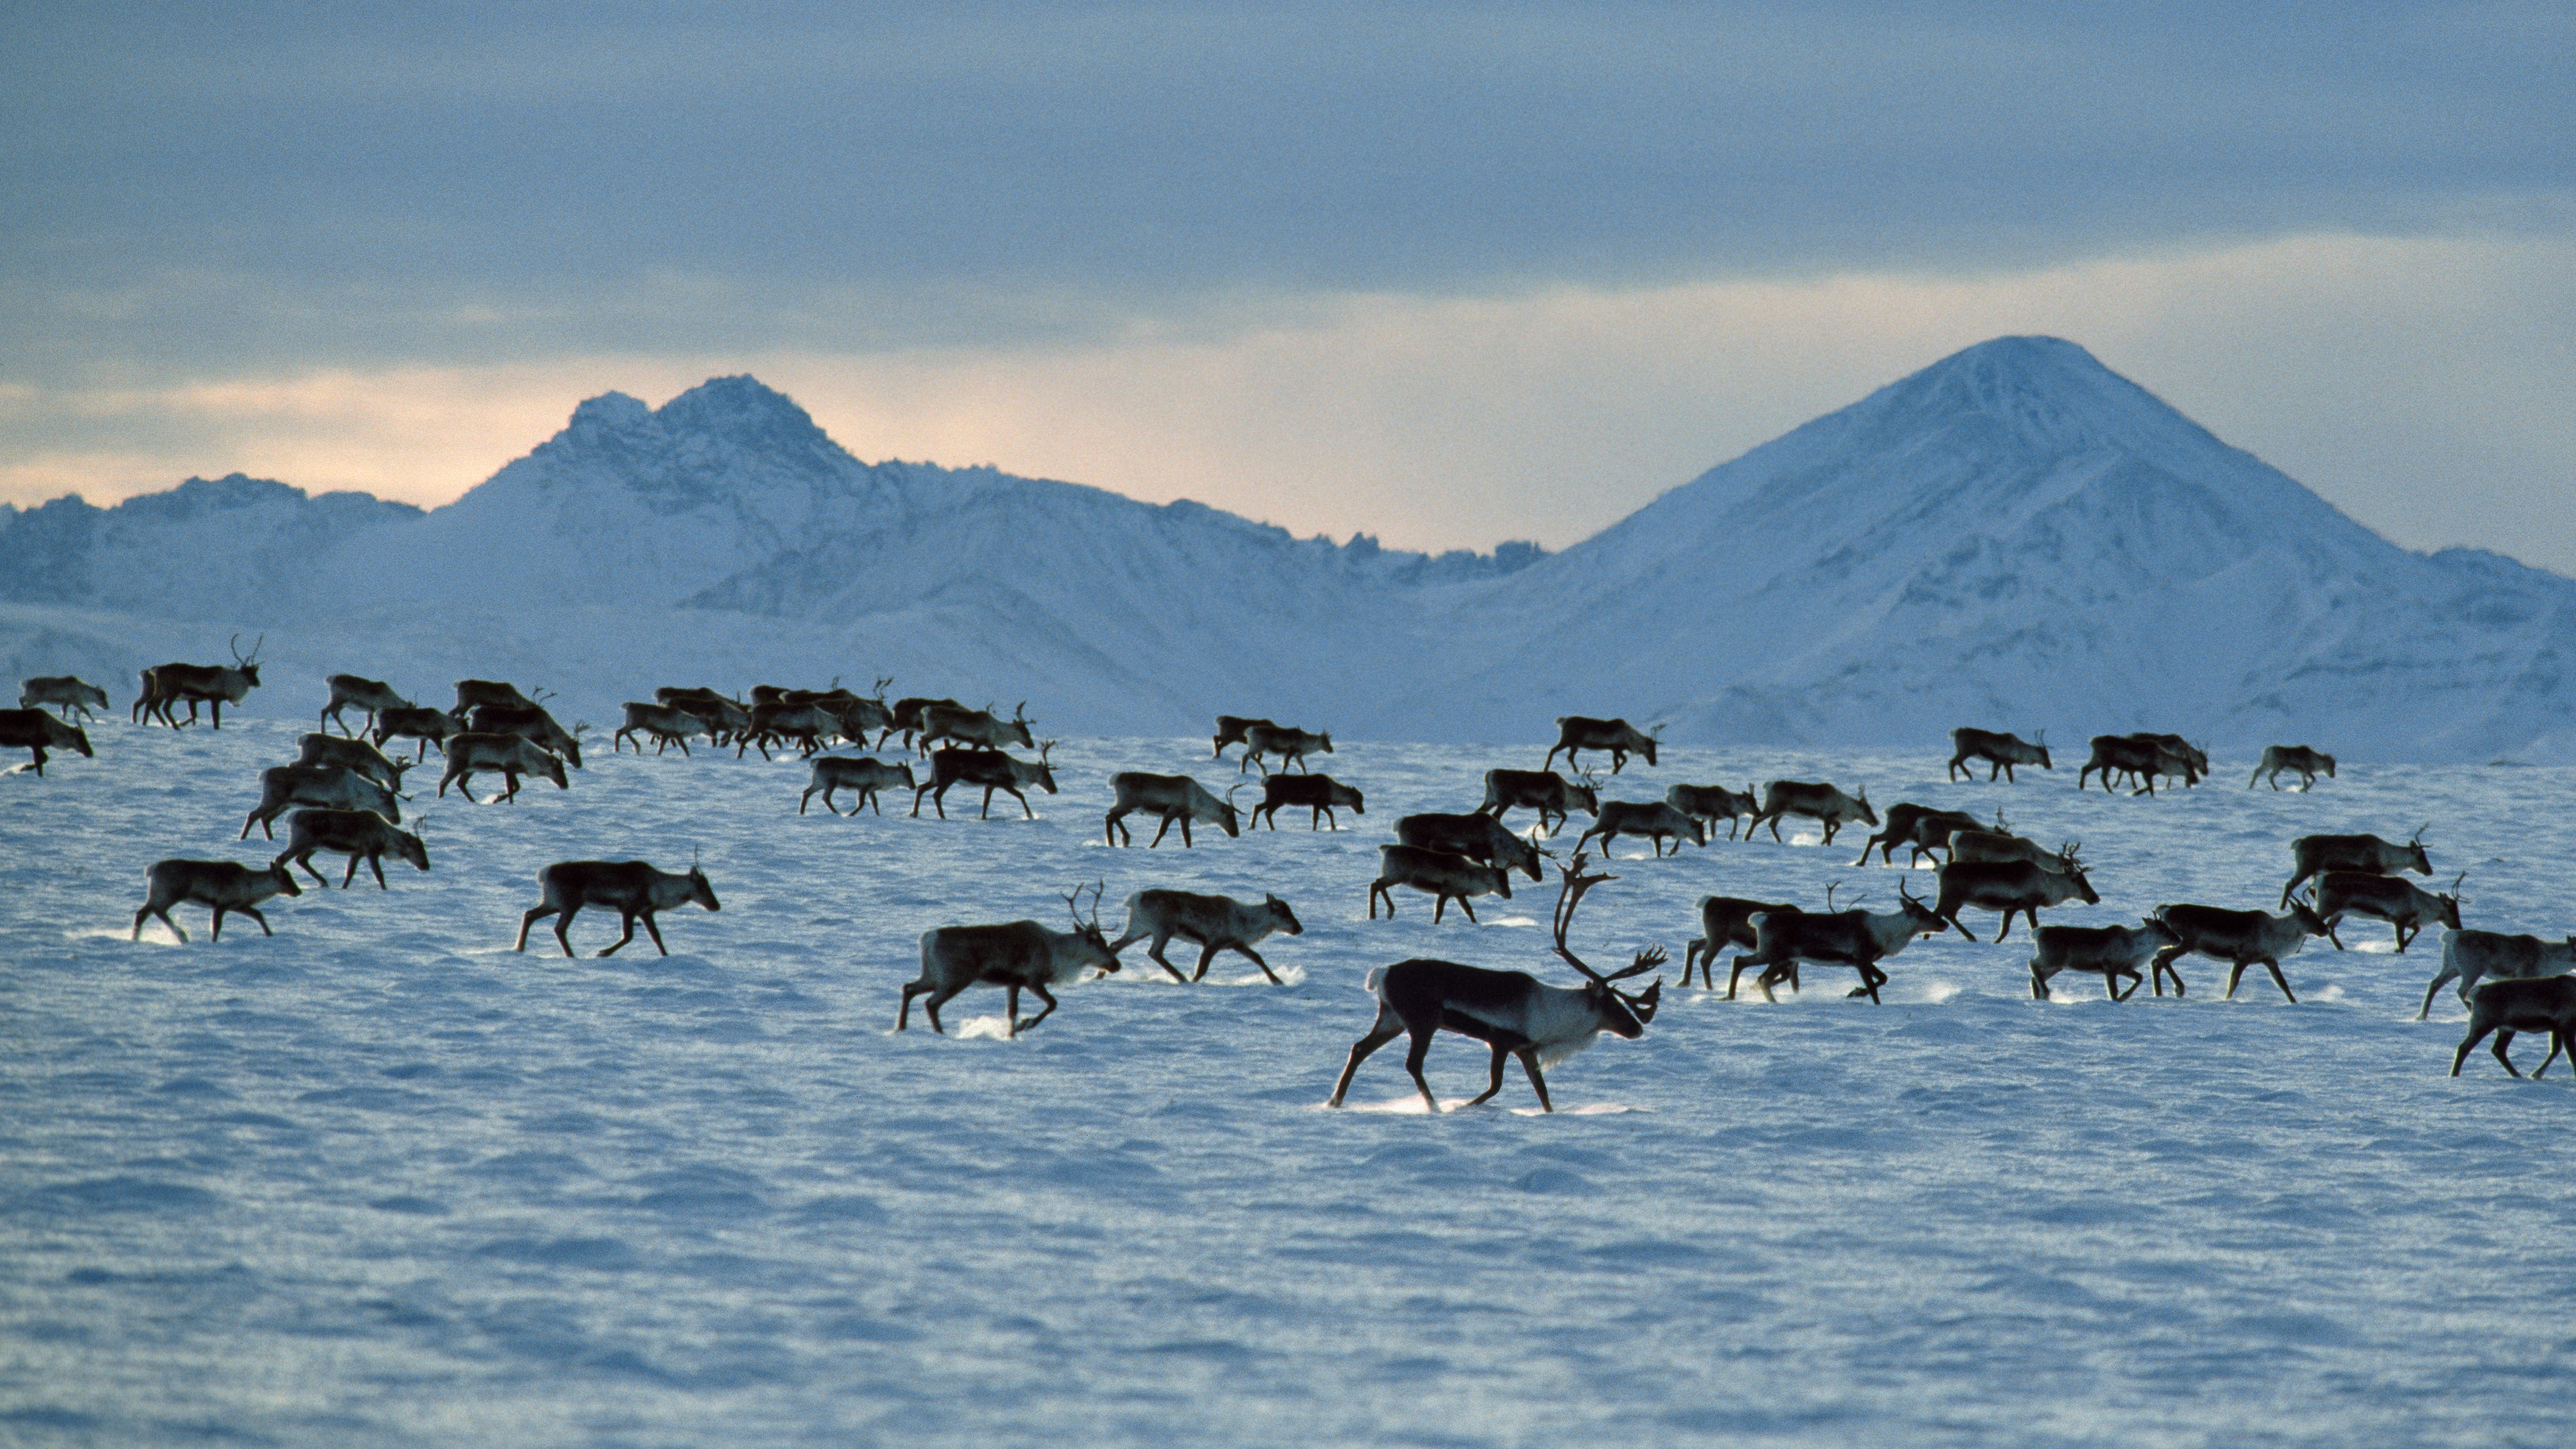 A herd of caribou on an icy plain in Alaska